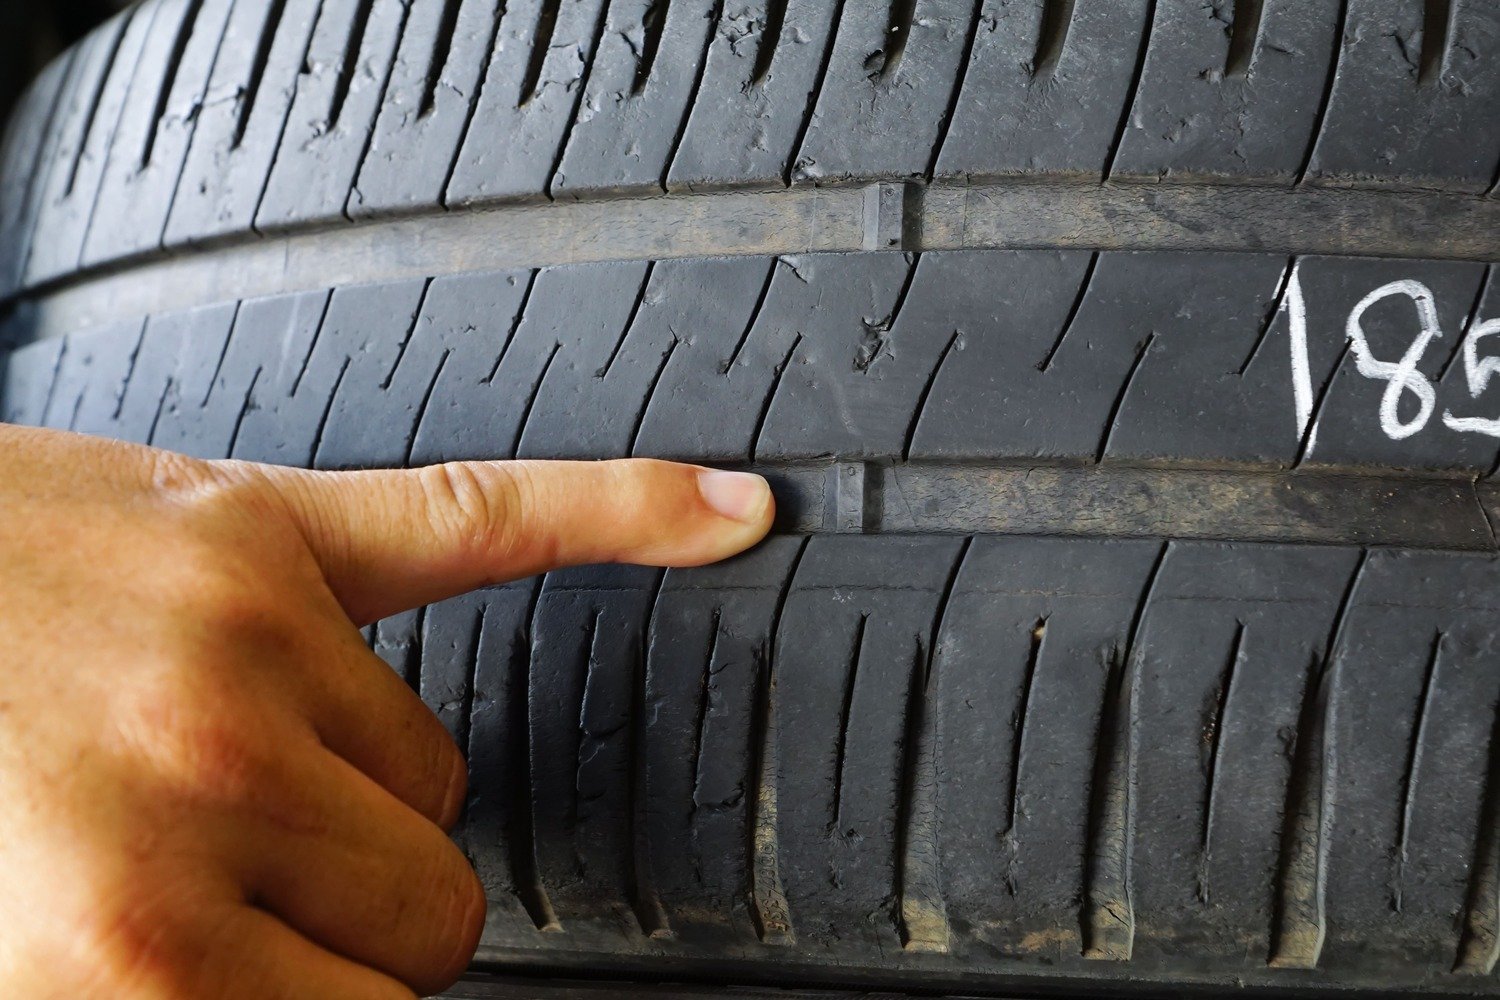 finer pointing to location of car tire tread wear indicator